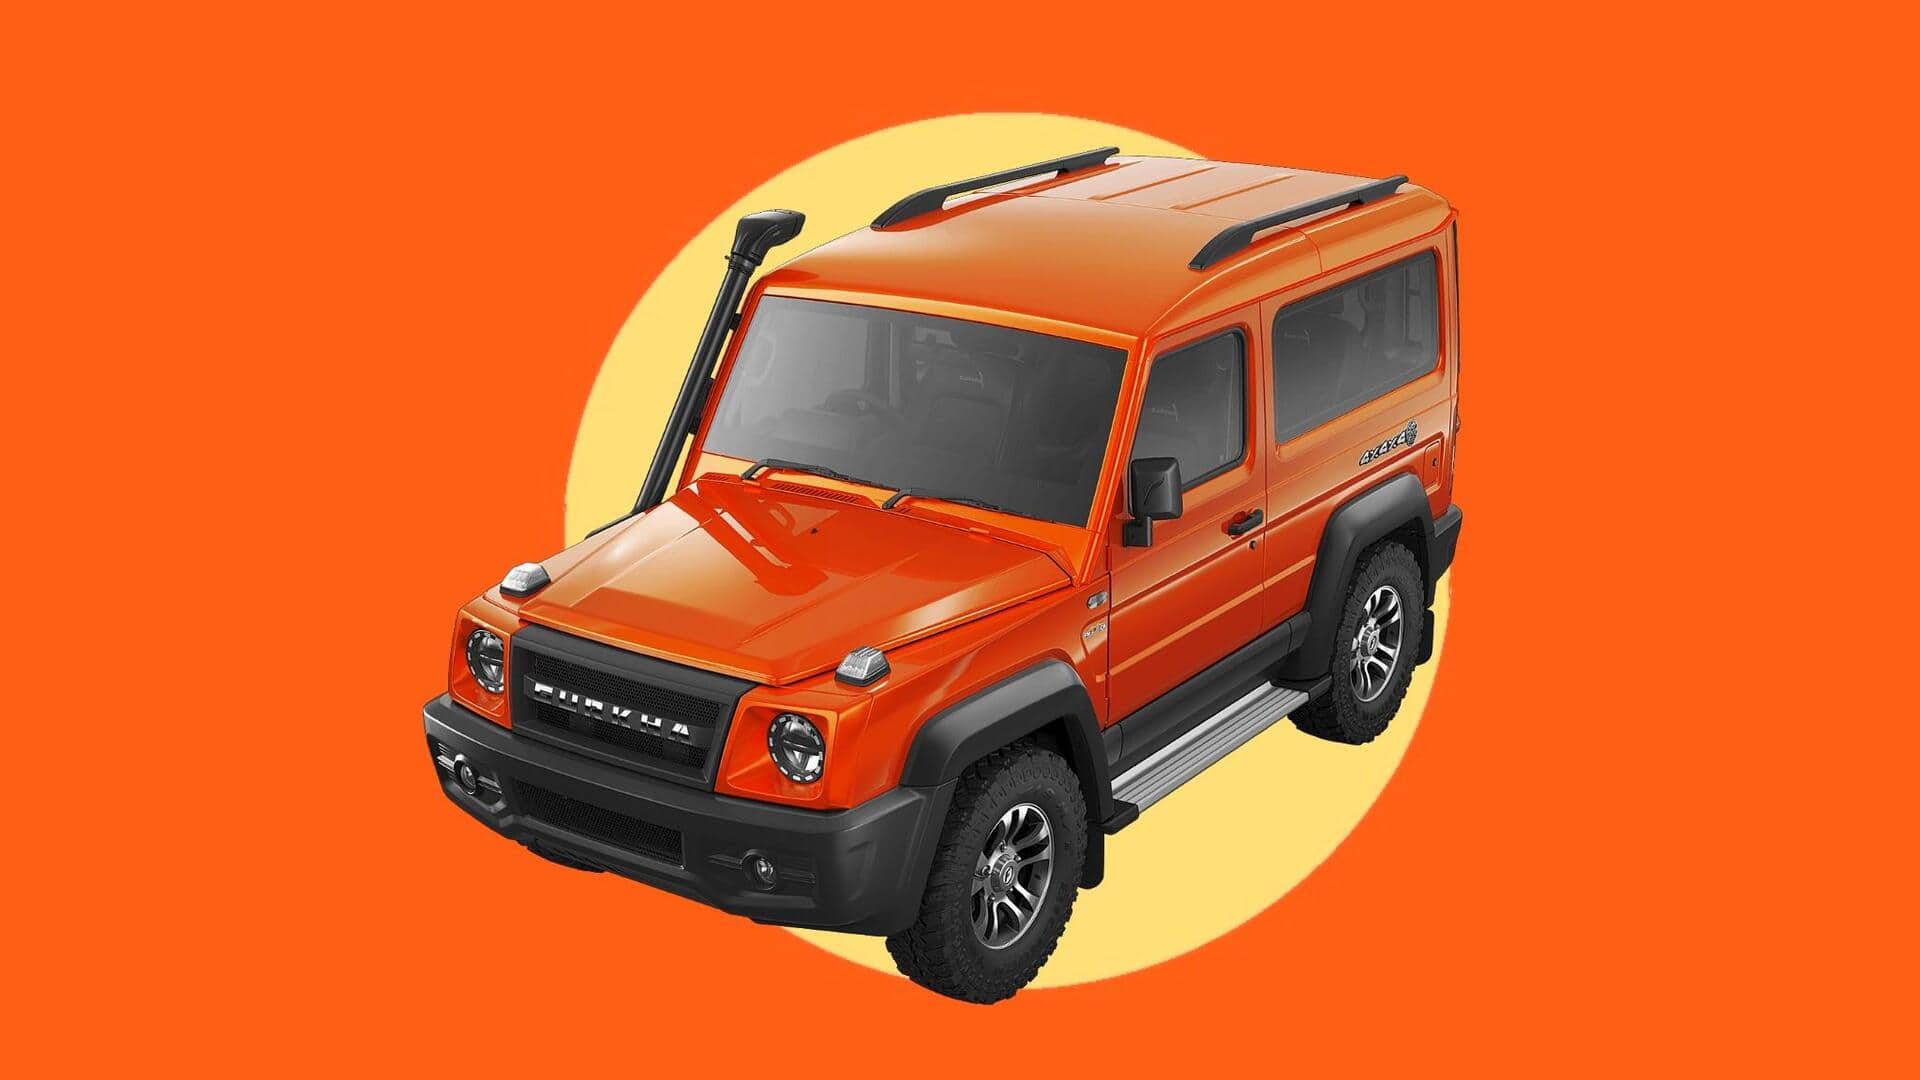 New Force Gurkha 5-door in the works: What to expect